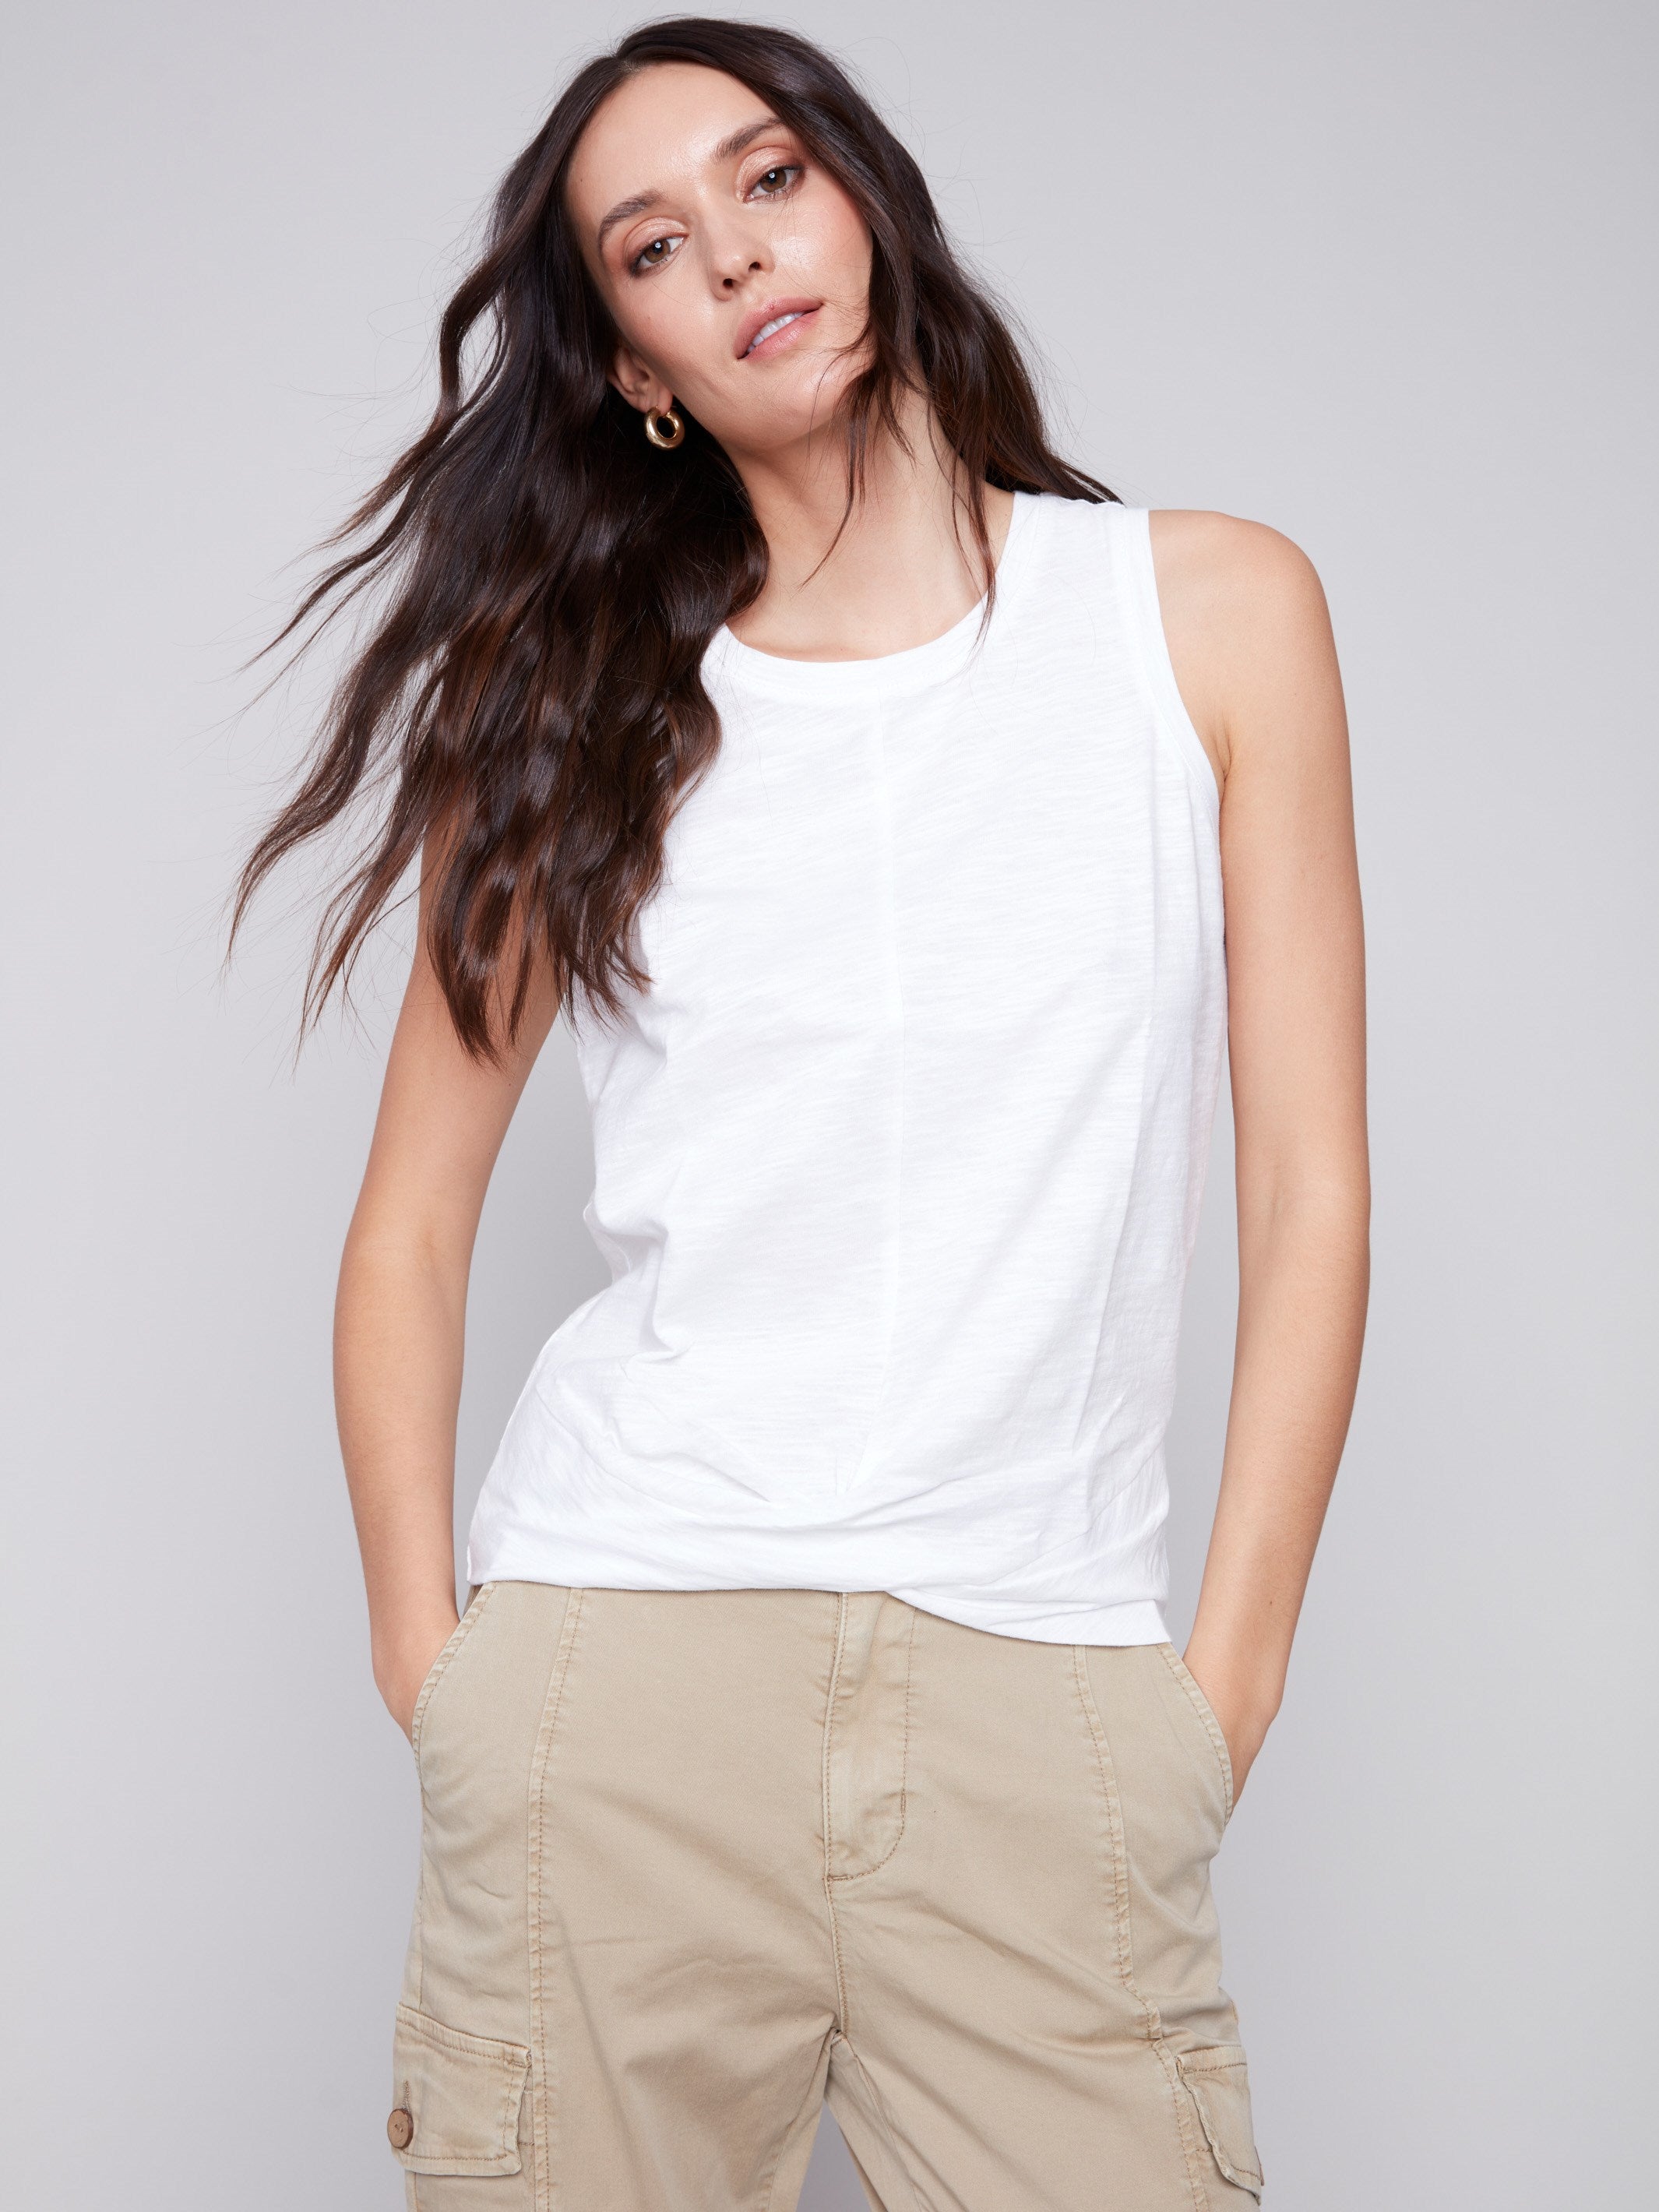 Women's Tops, T-Shirts, Sweaters & Blouses